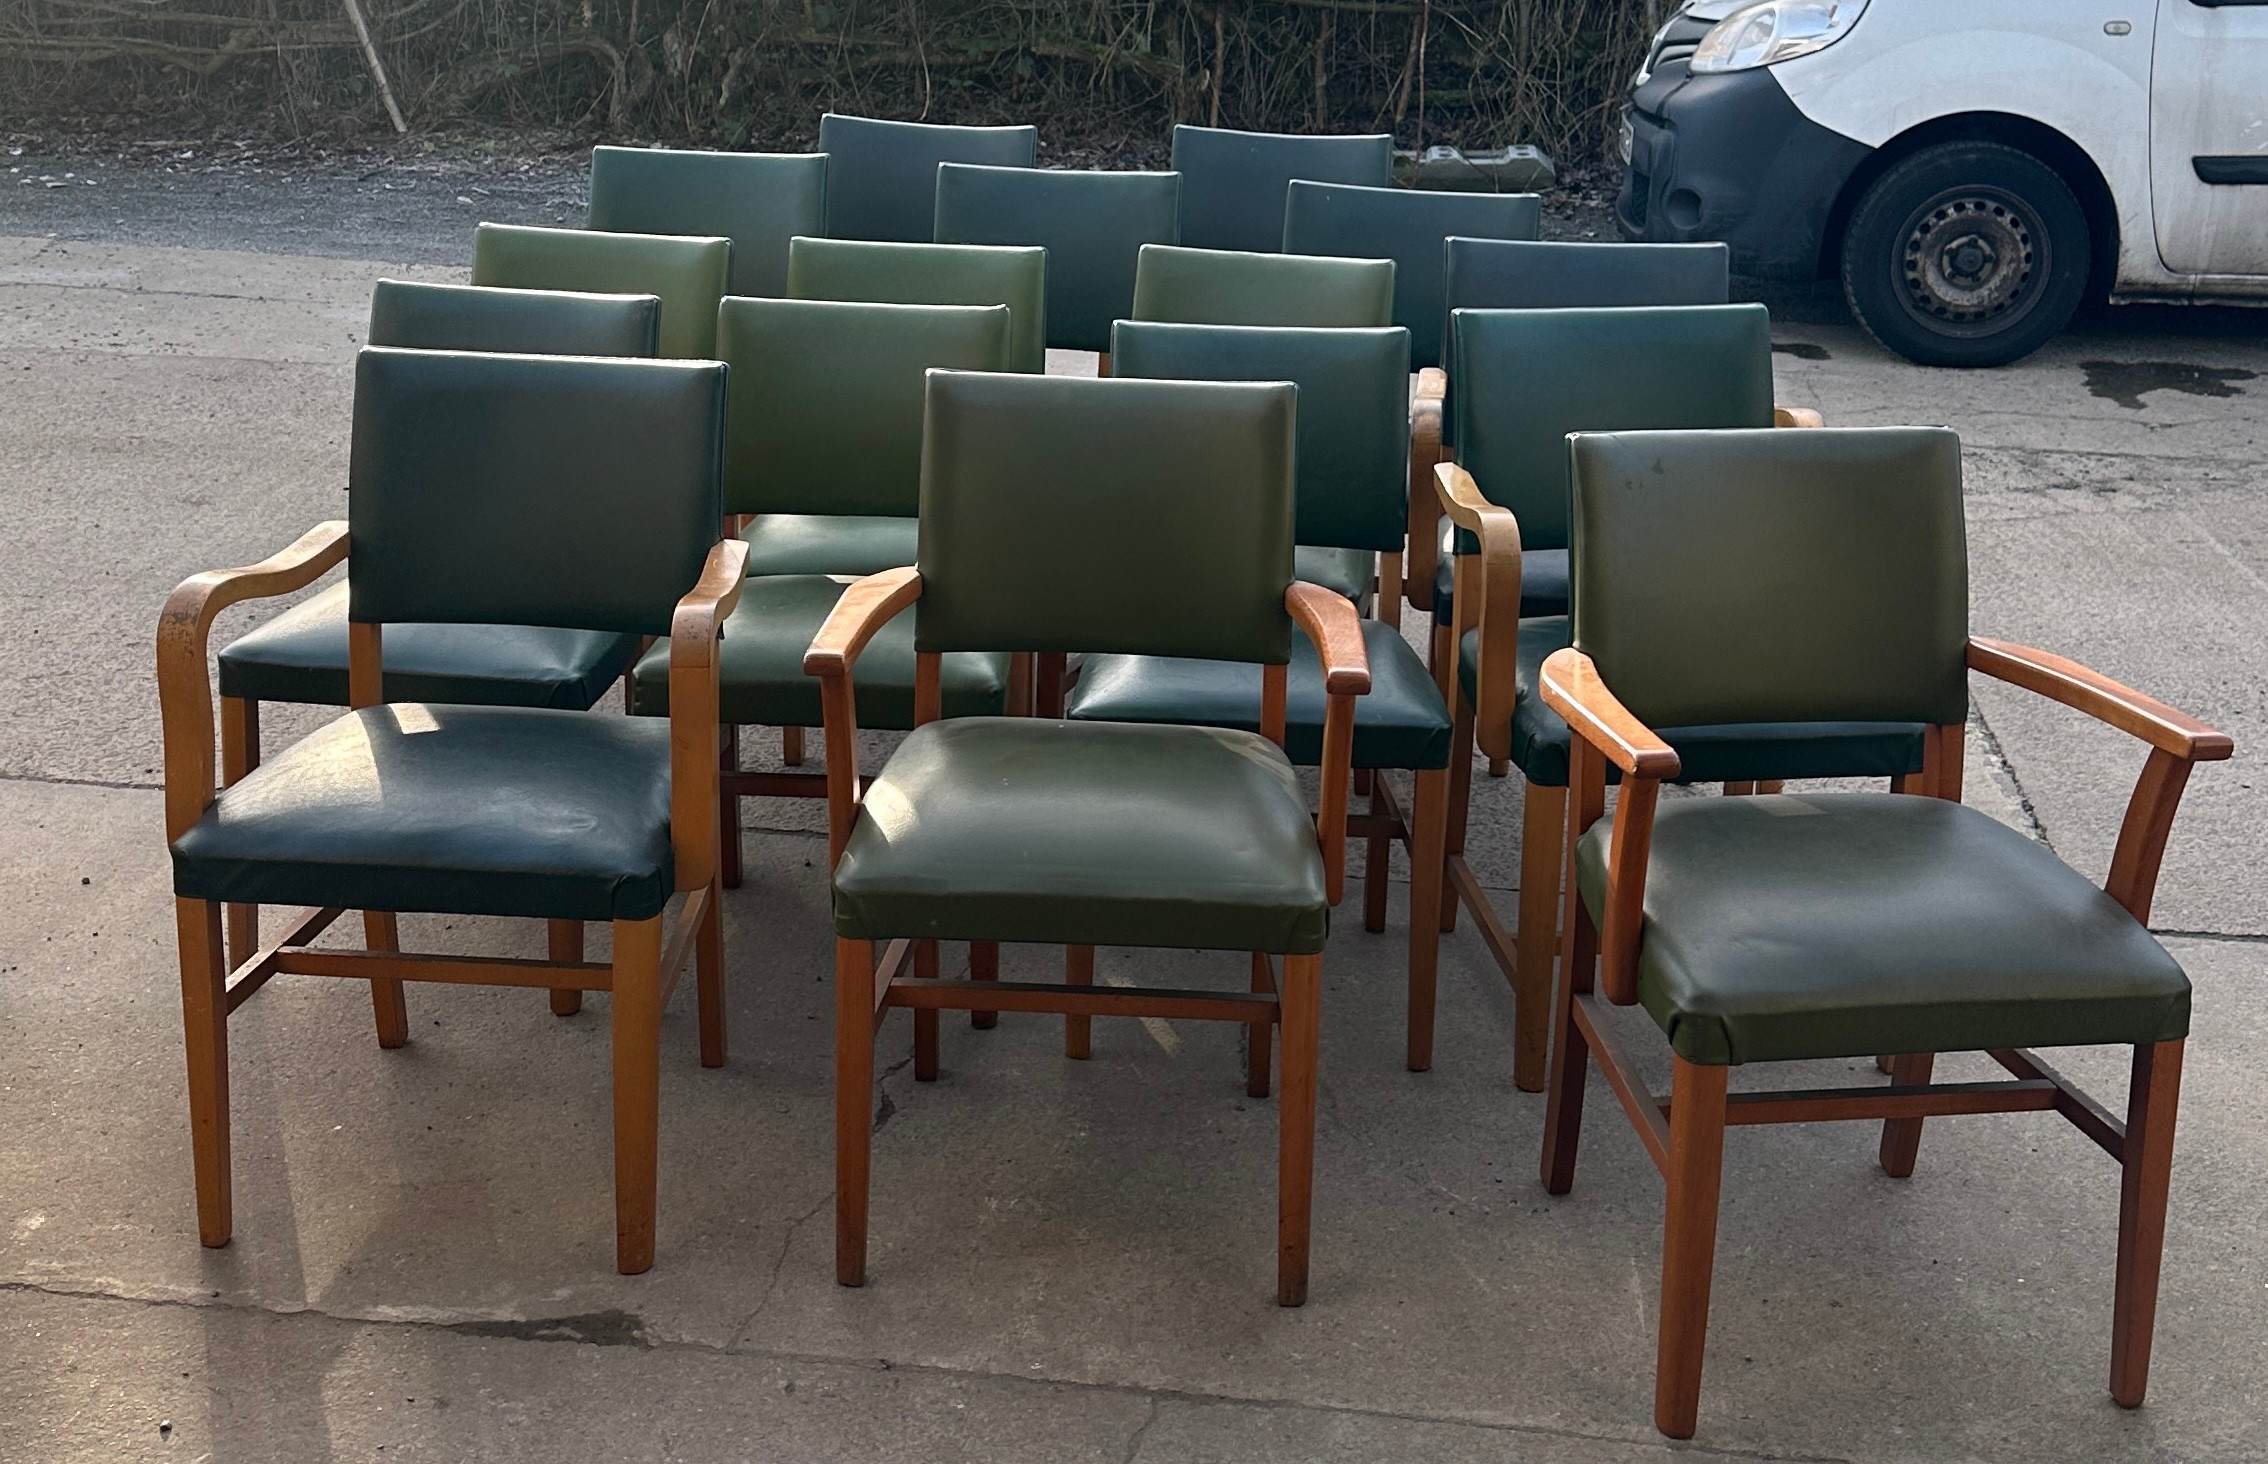 verco vintage board room chairs 16 in total 10 with arms